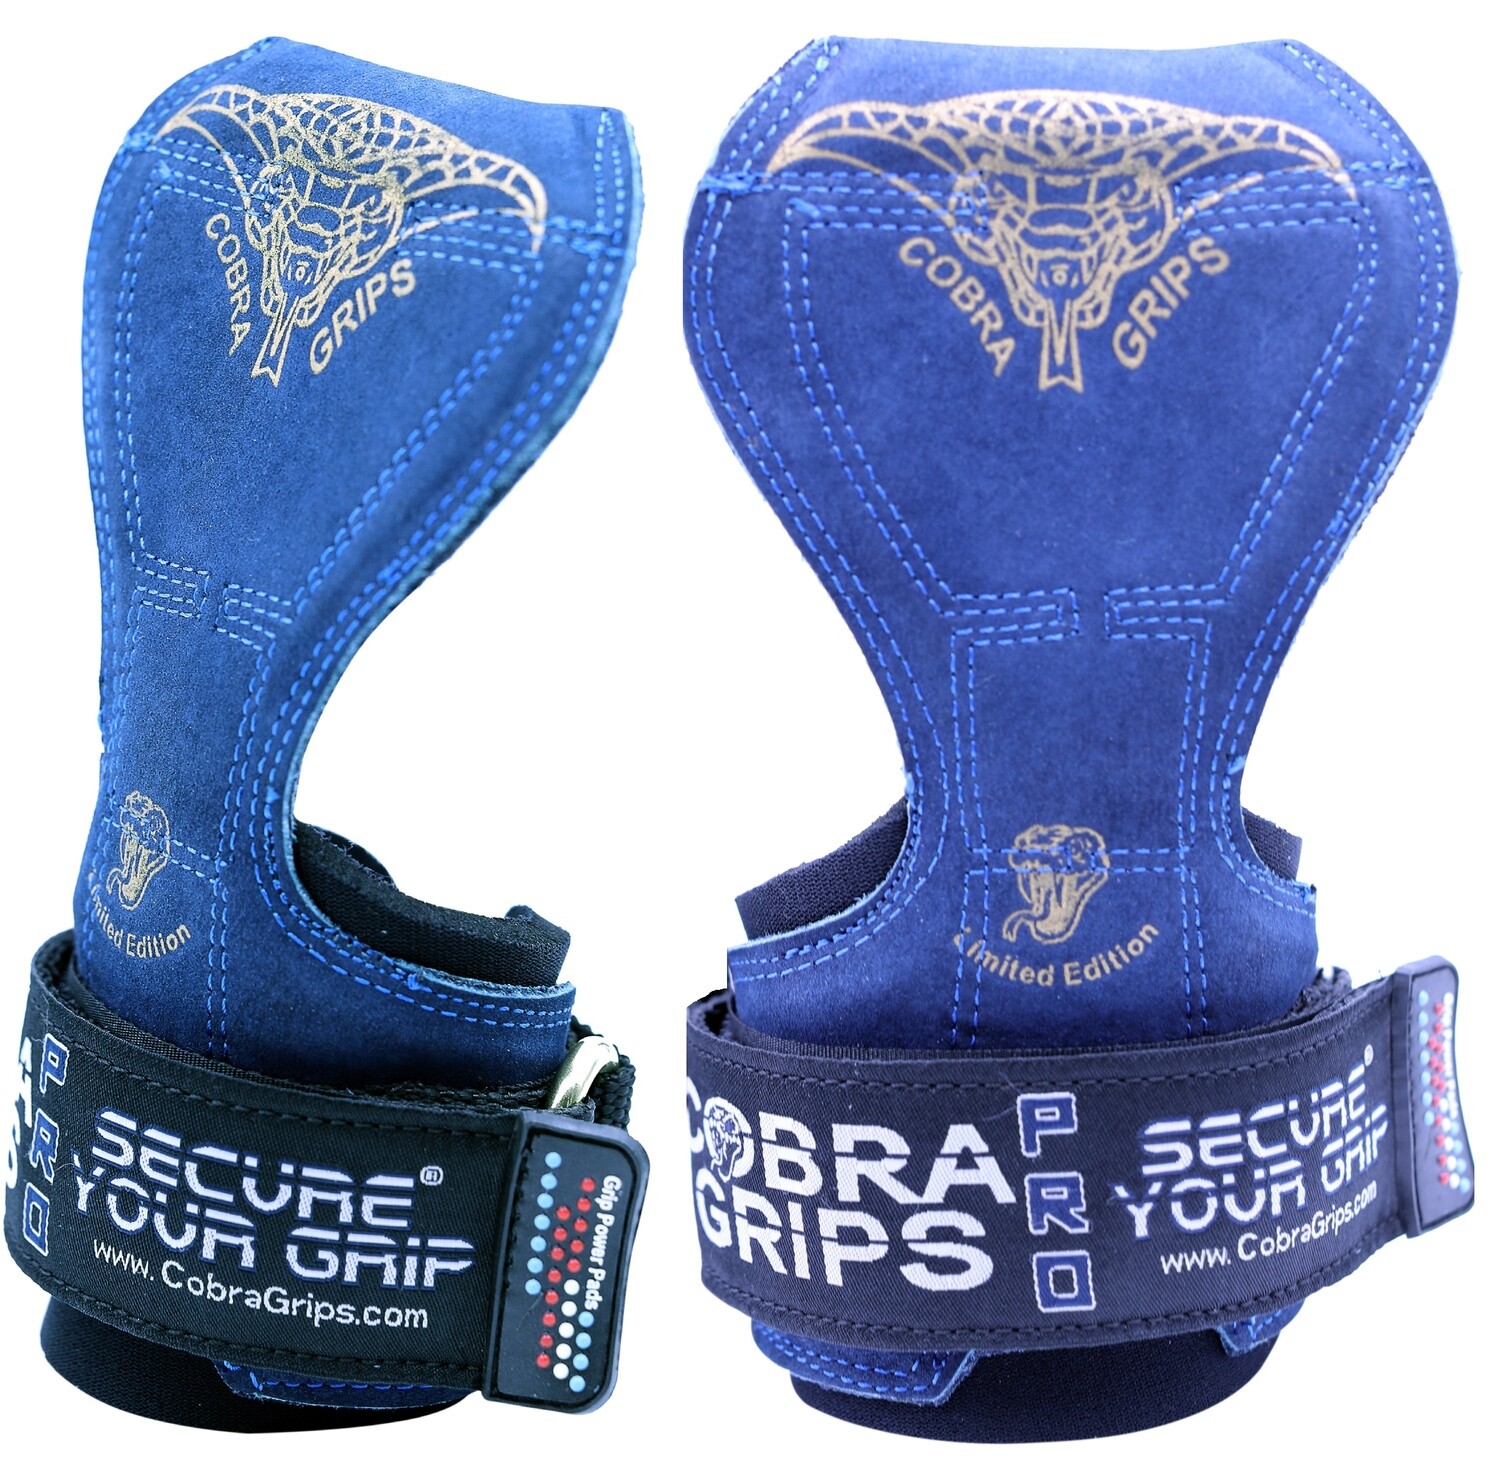 Cobra Grips PRO Limited Edition Gym Body Building Hooks Gloves Sports Weight Lifting Grips